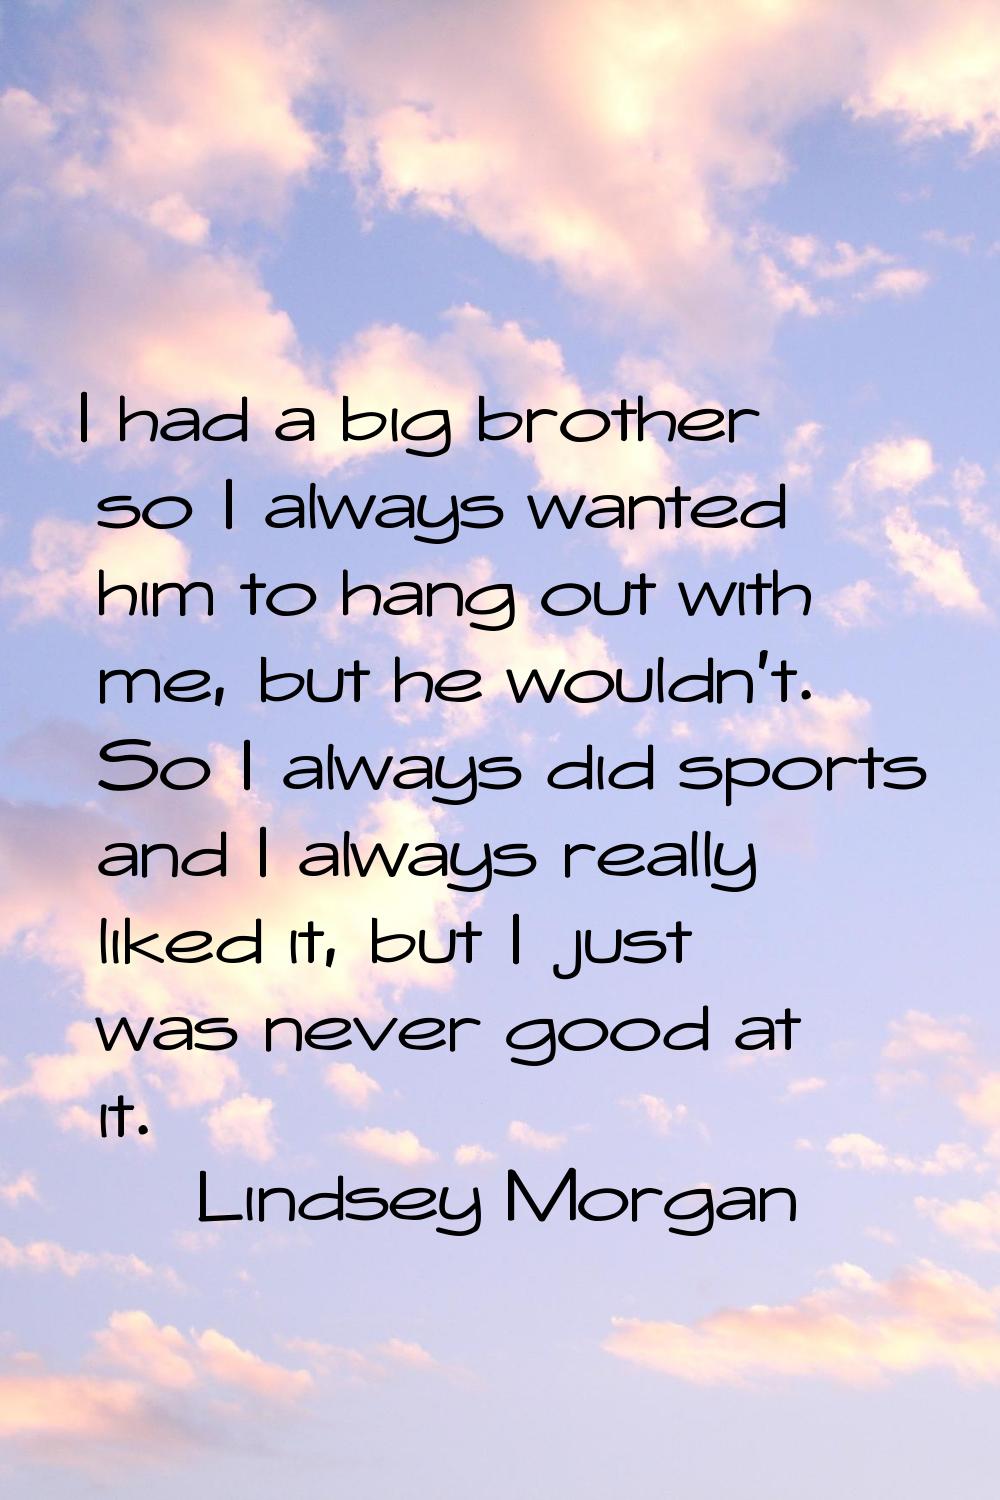 I had a big brother so I always wanted him to hang out with me, but he wouldn't. So I always did sp